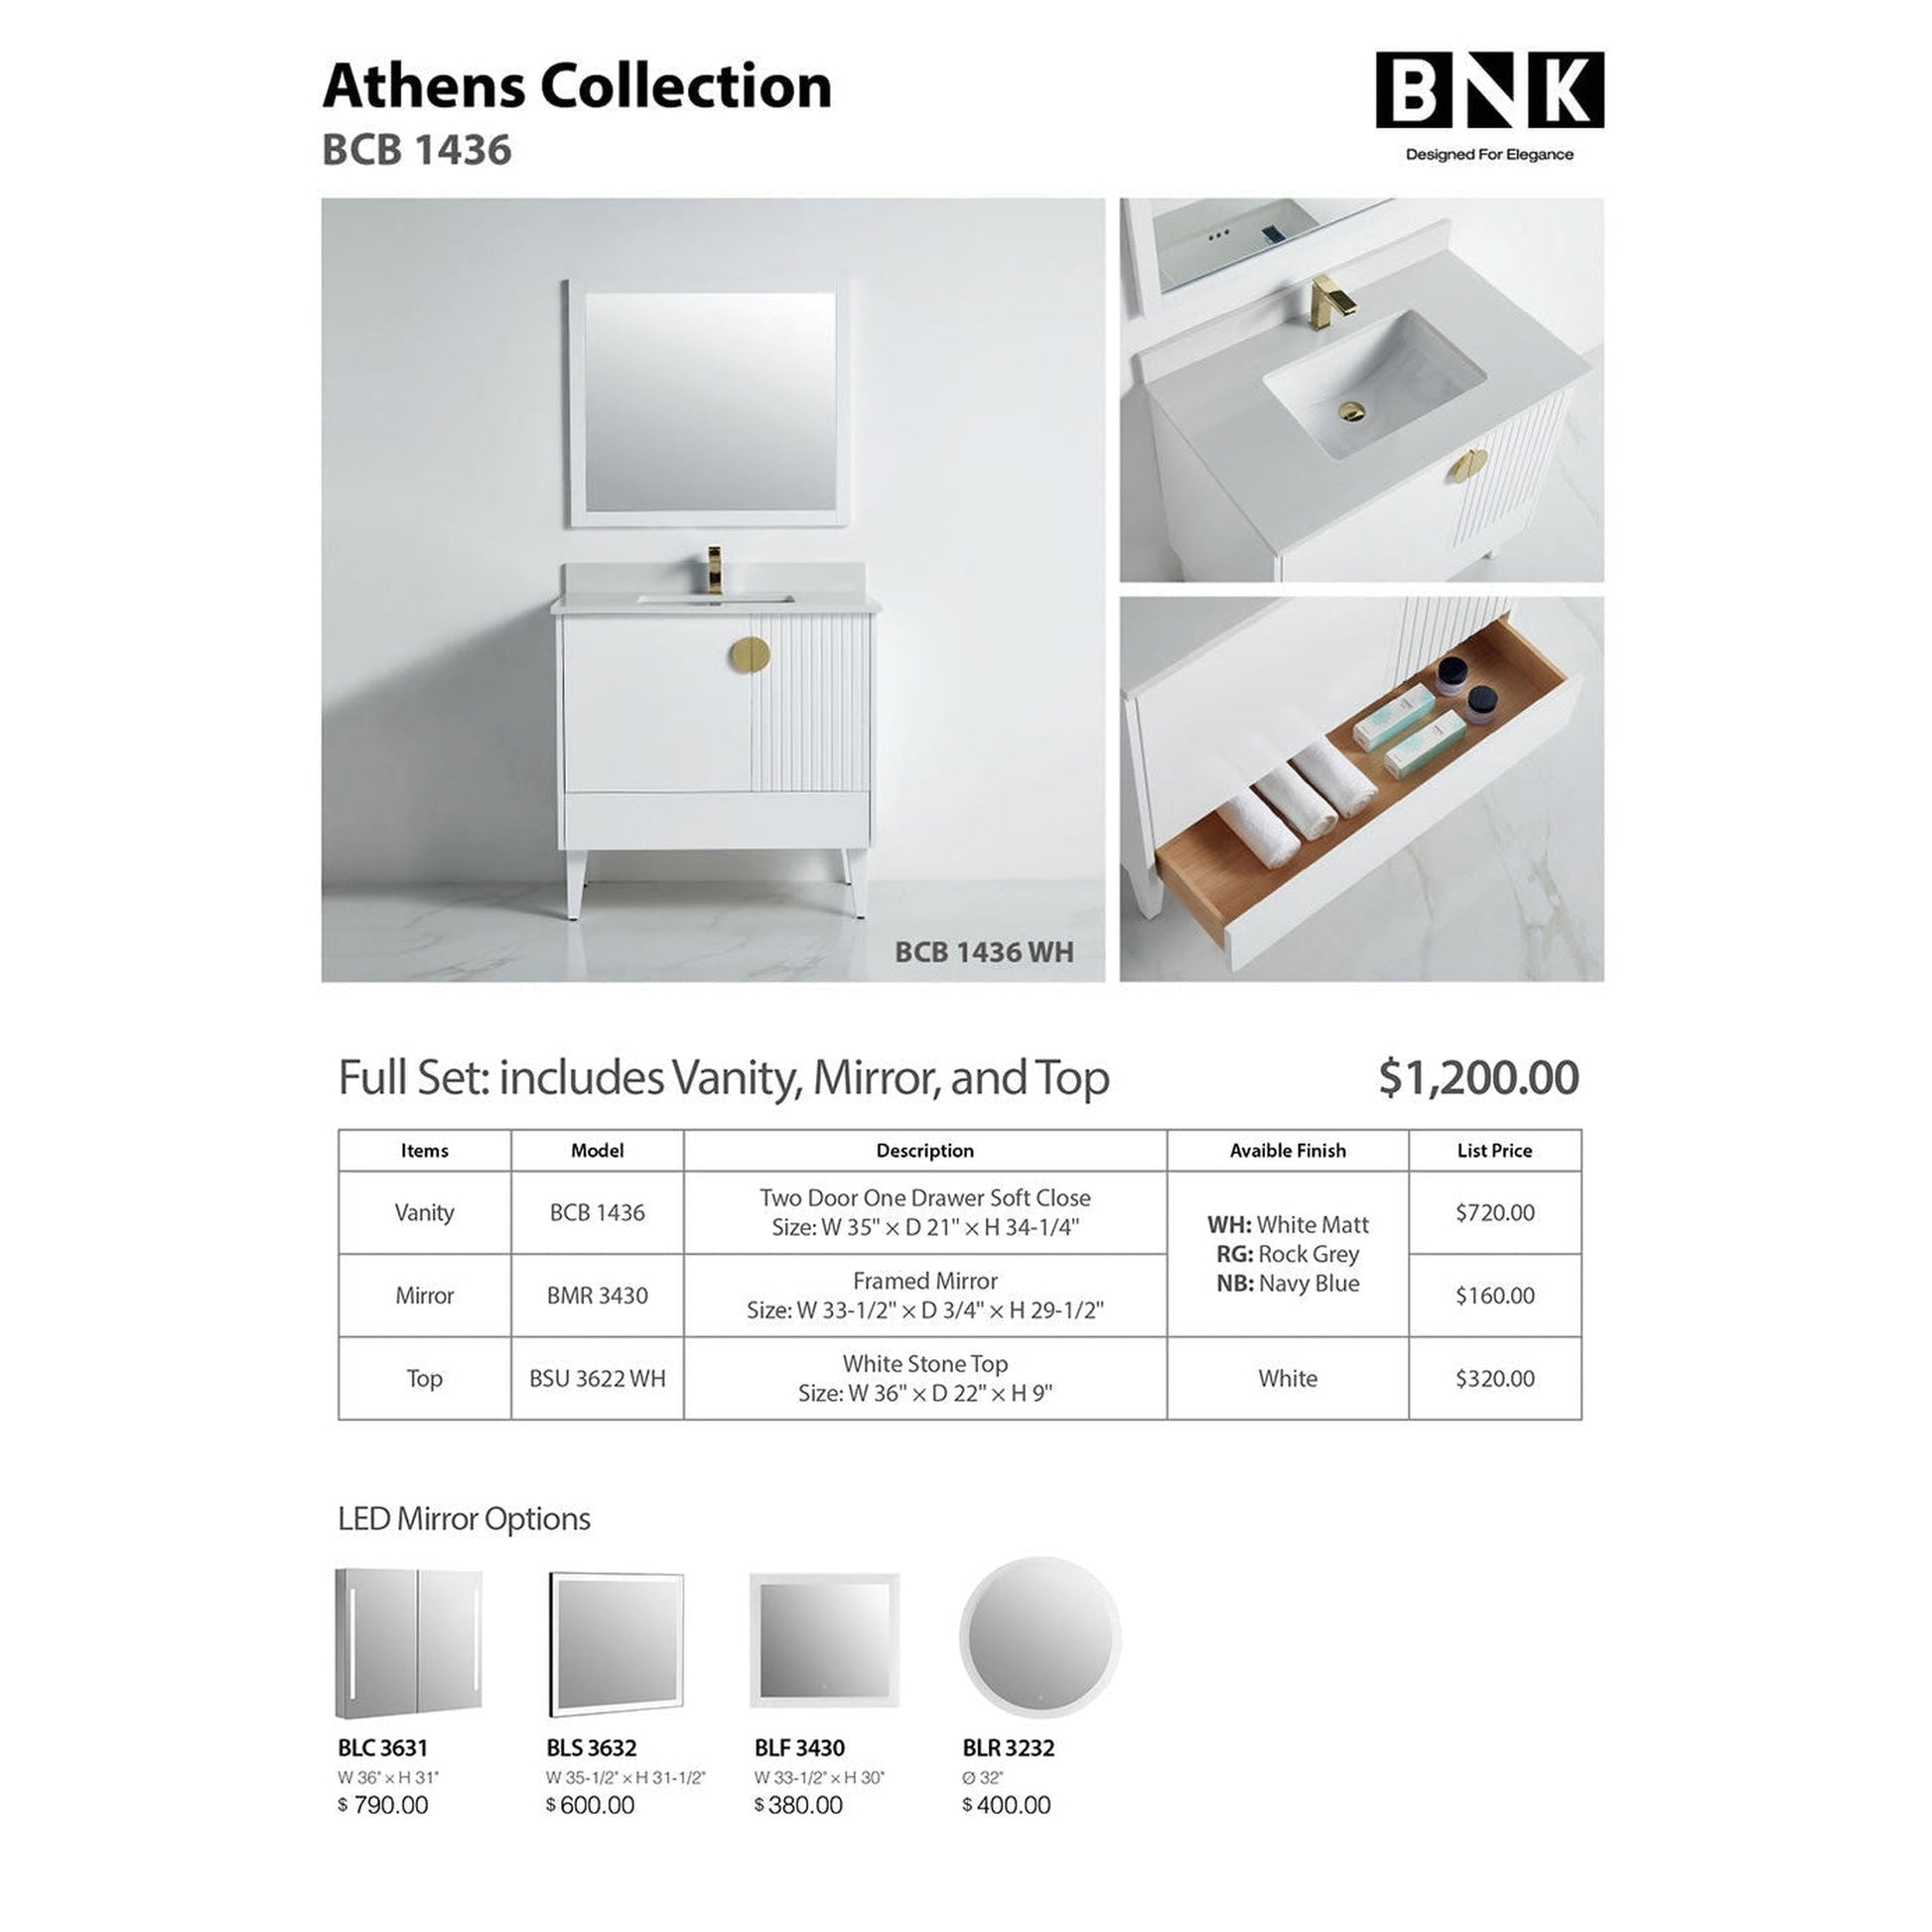 BNK BCB1436WH Athens Matt White Vanity Only Two-Door One Left Drawer Soft Close